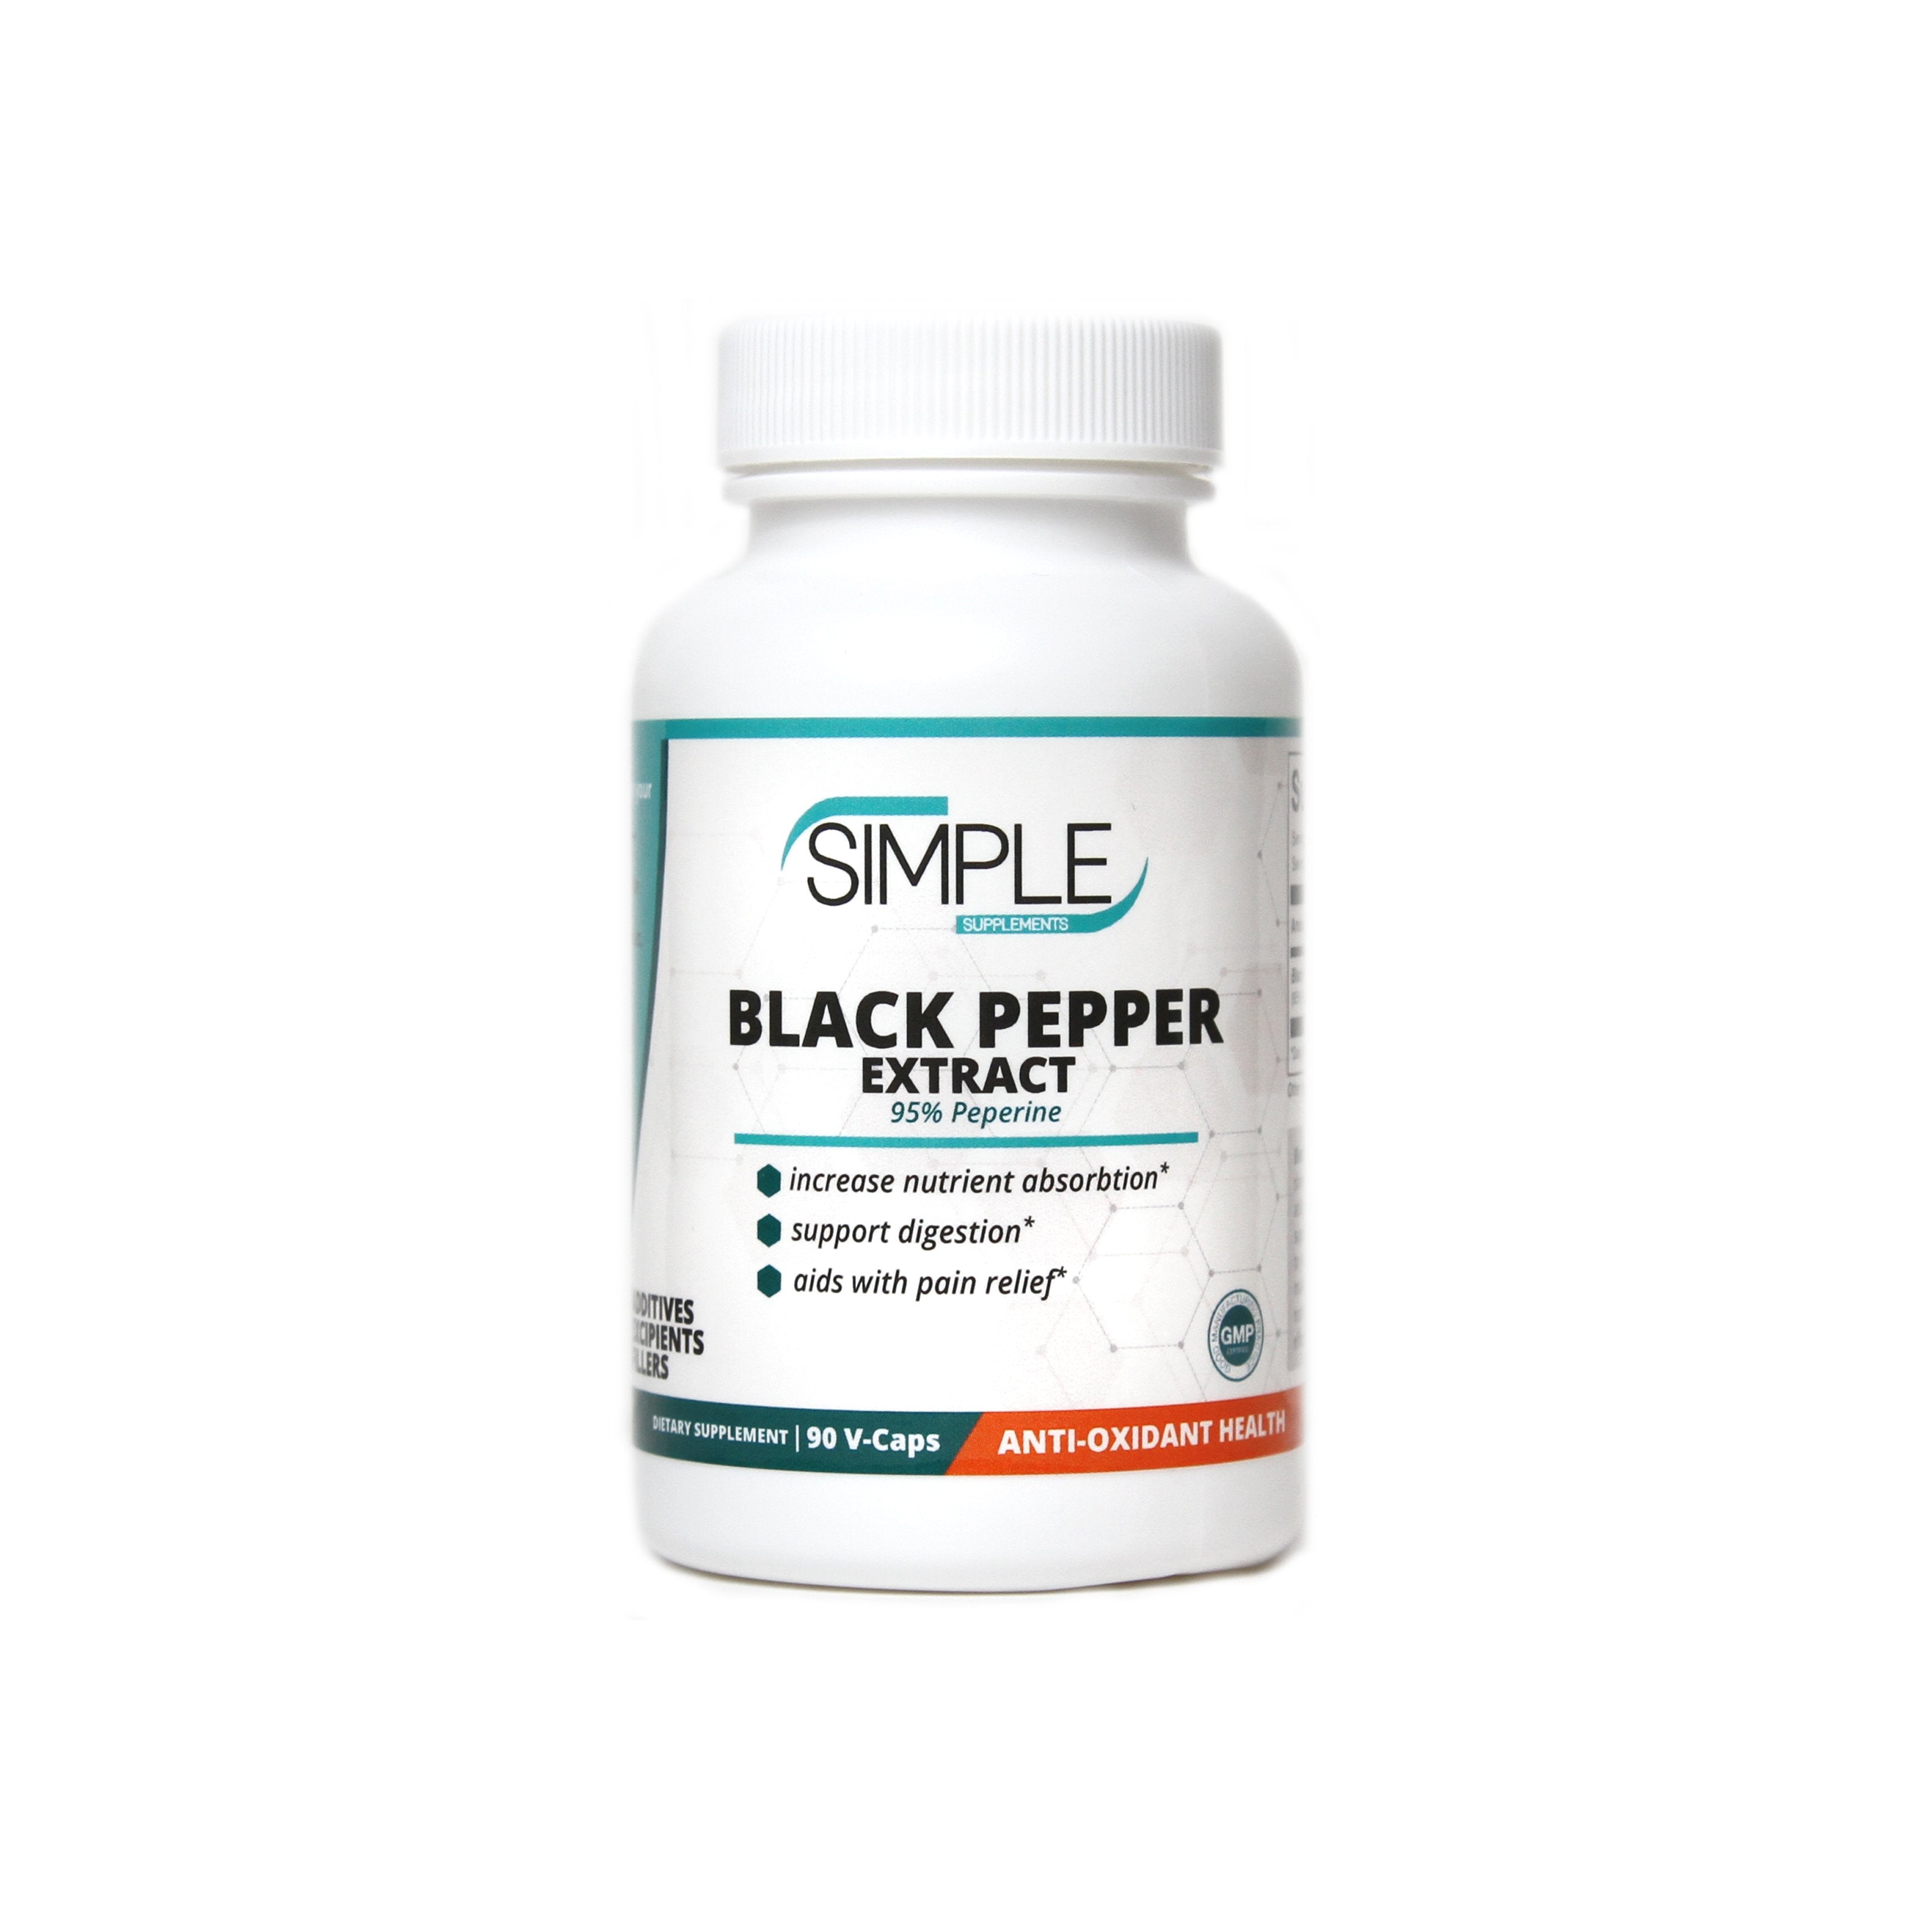 Black pepper extract for pain relief